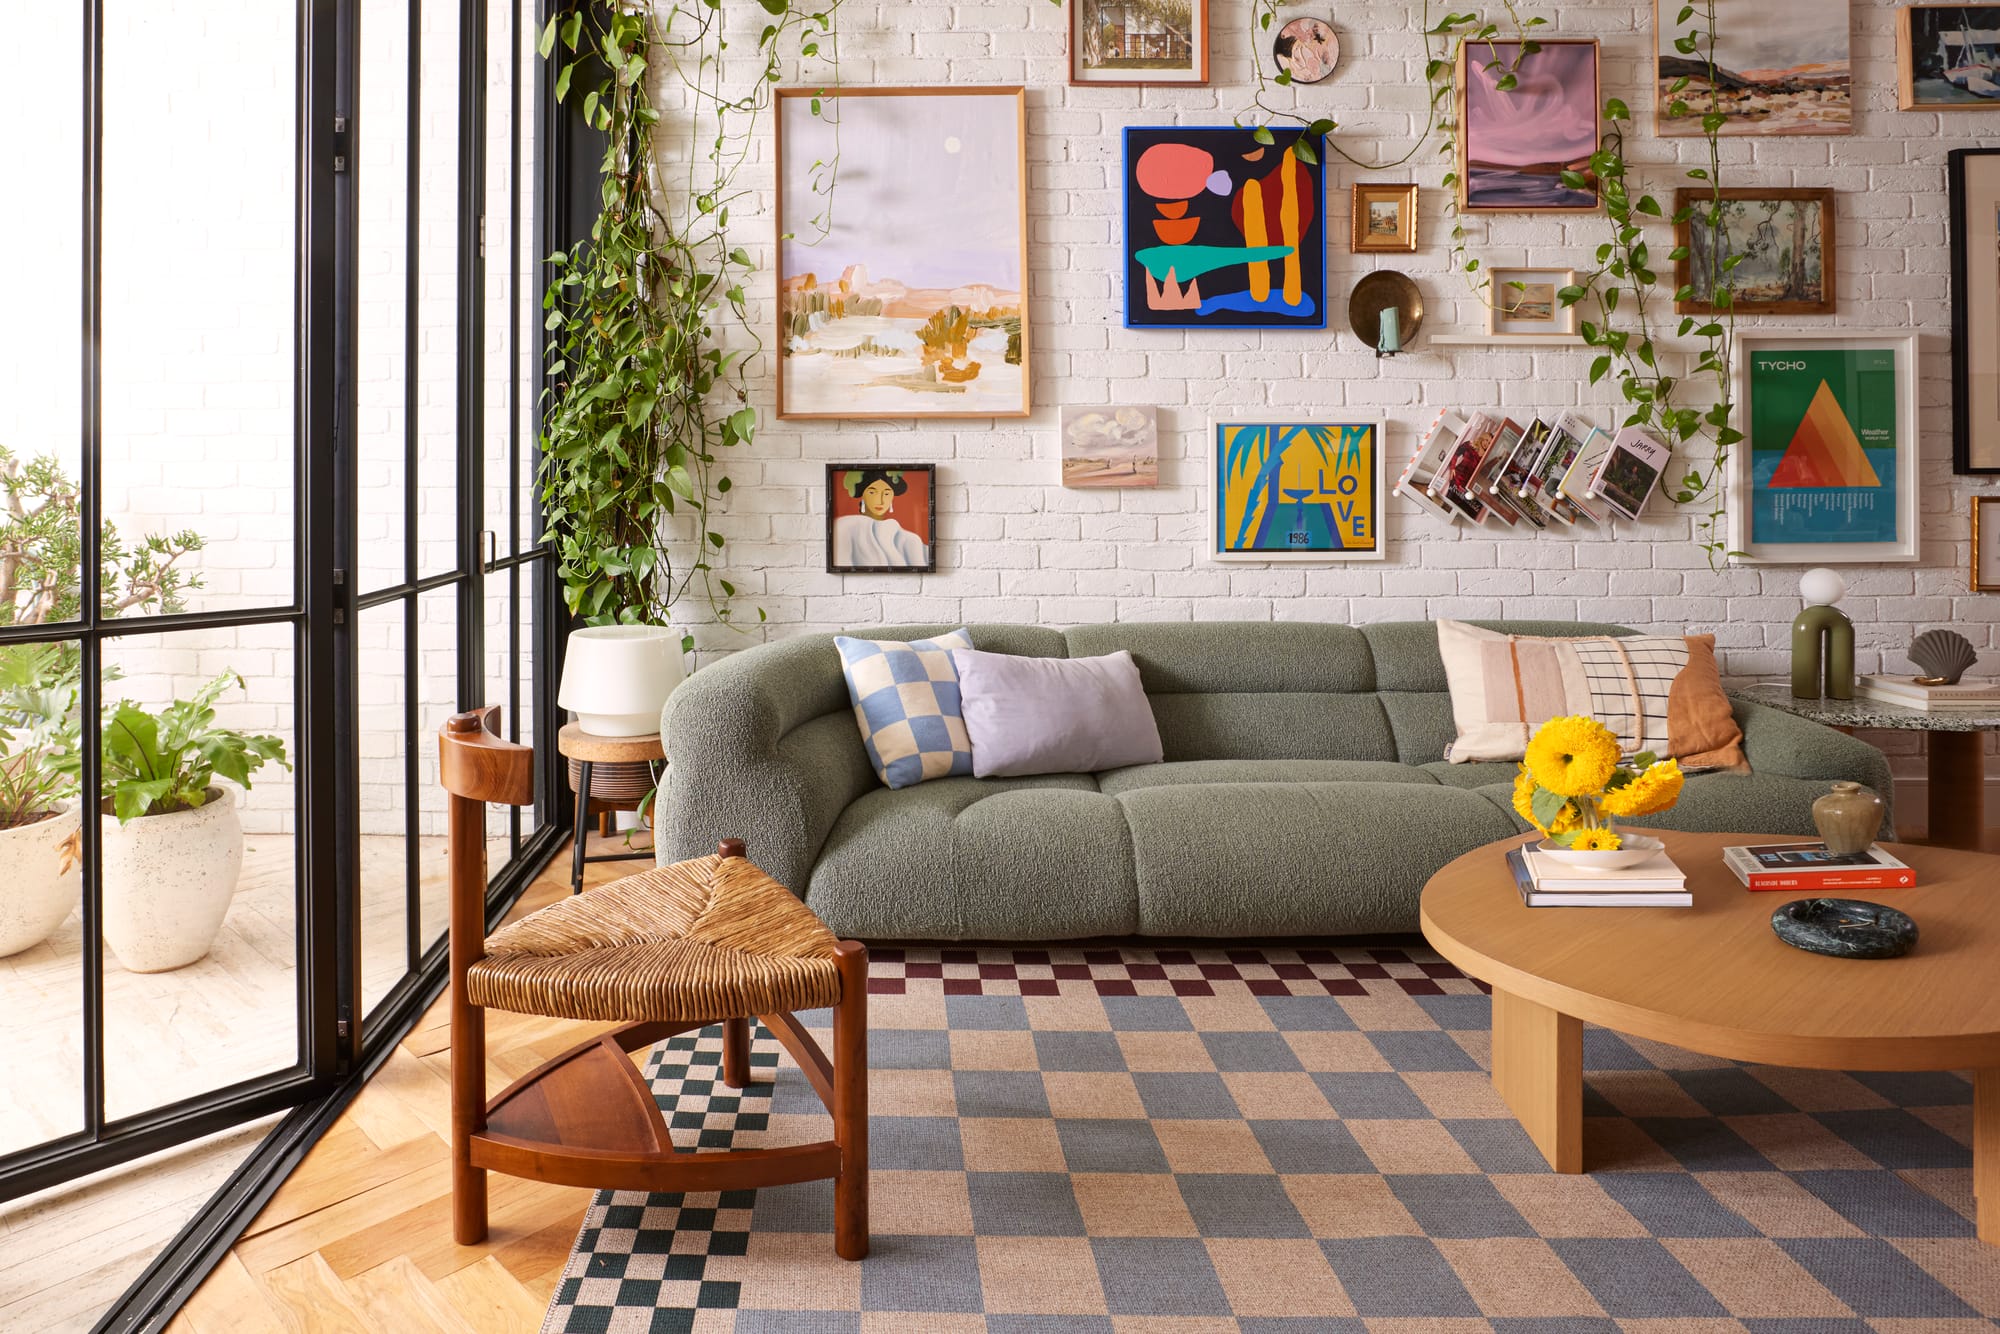 Double Rugs New Check Collection. Photographer: Jacqui Turk. Living room with green couch, white brick walls and herringbone timber floors. Checkered rug on floor. Lots of colourful artwork on wall. 